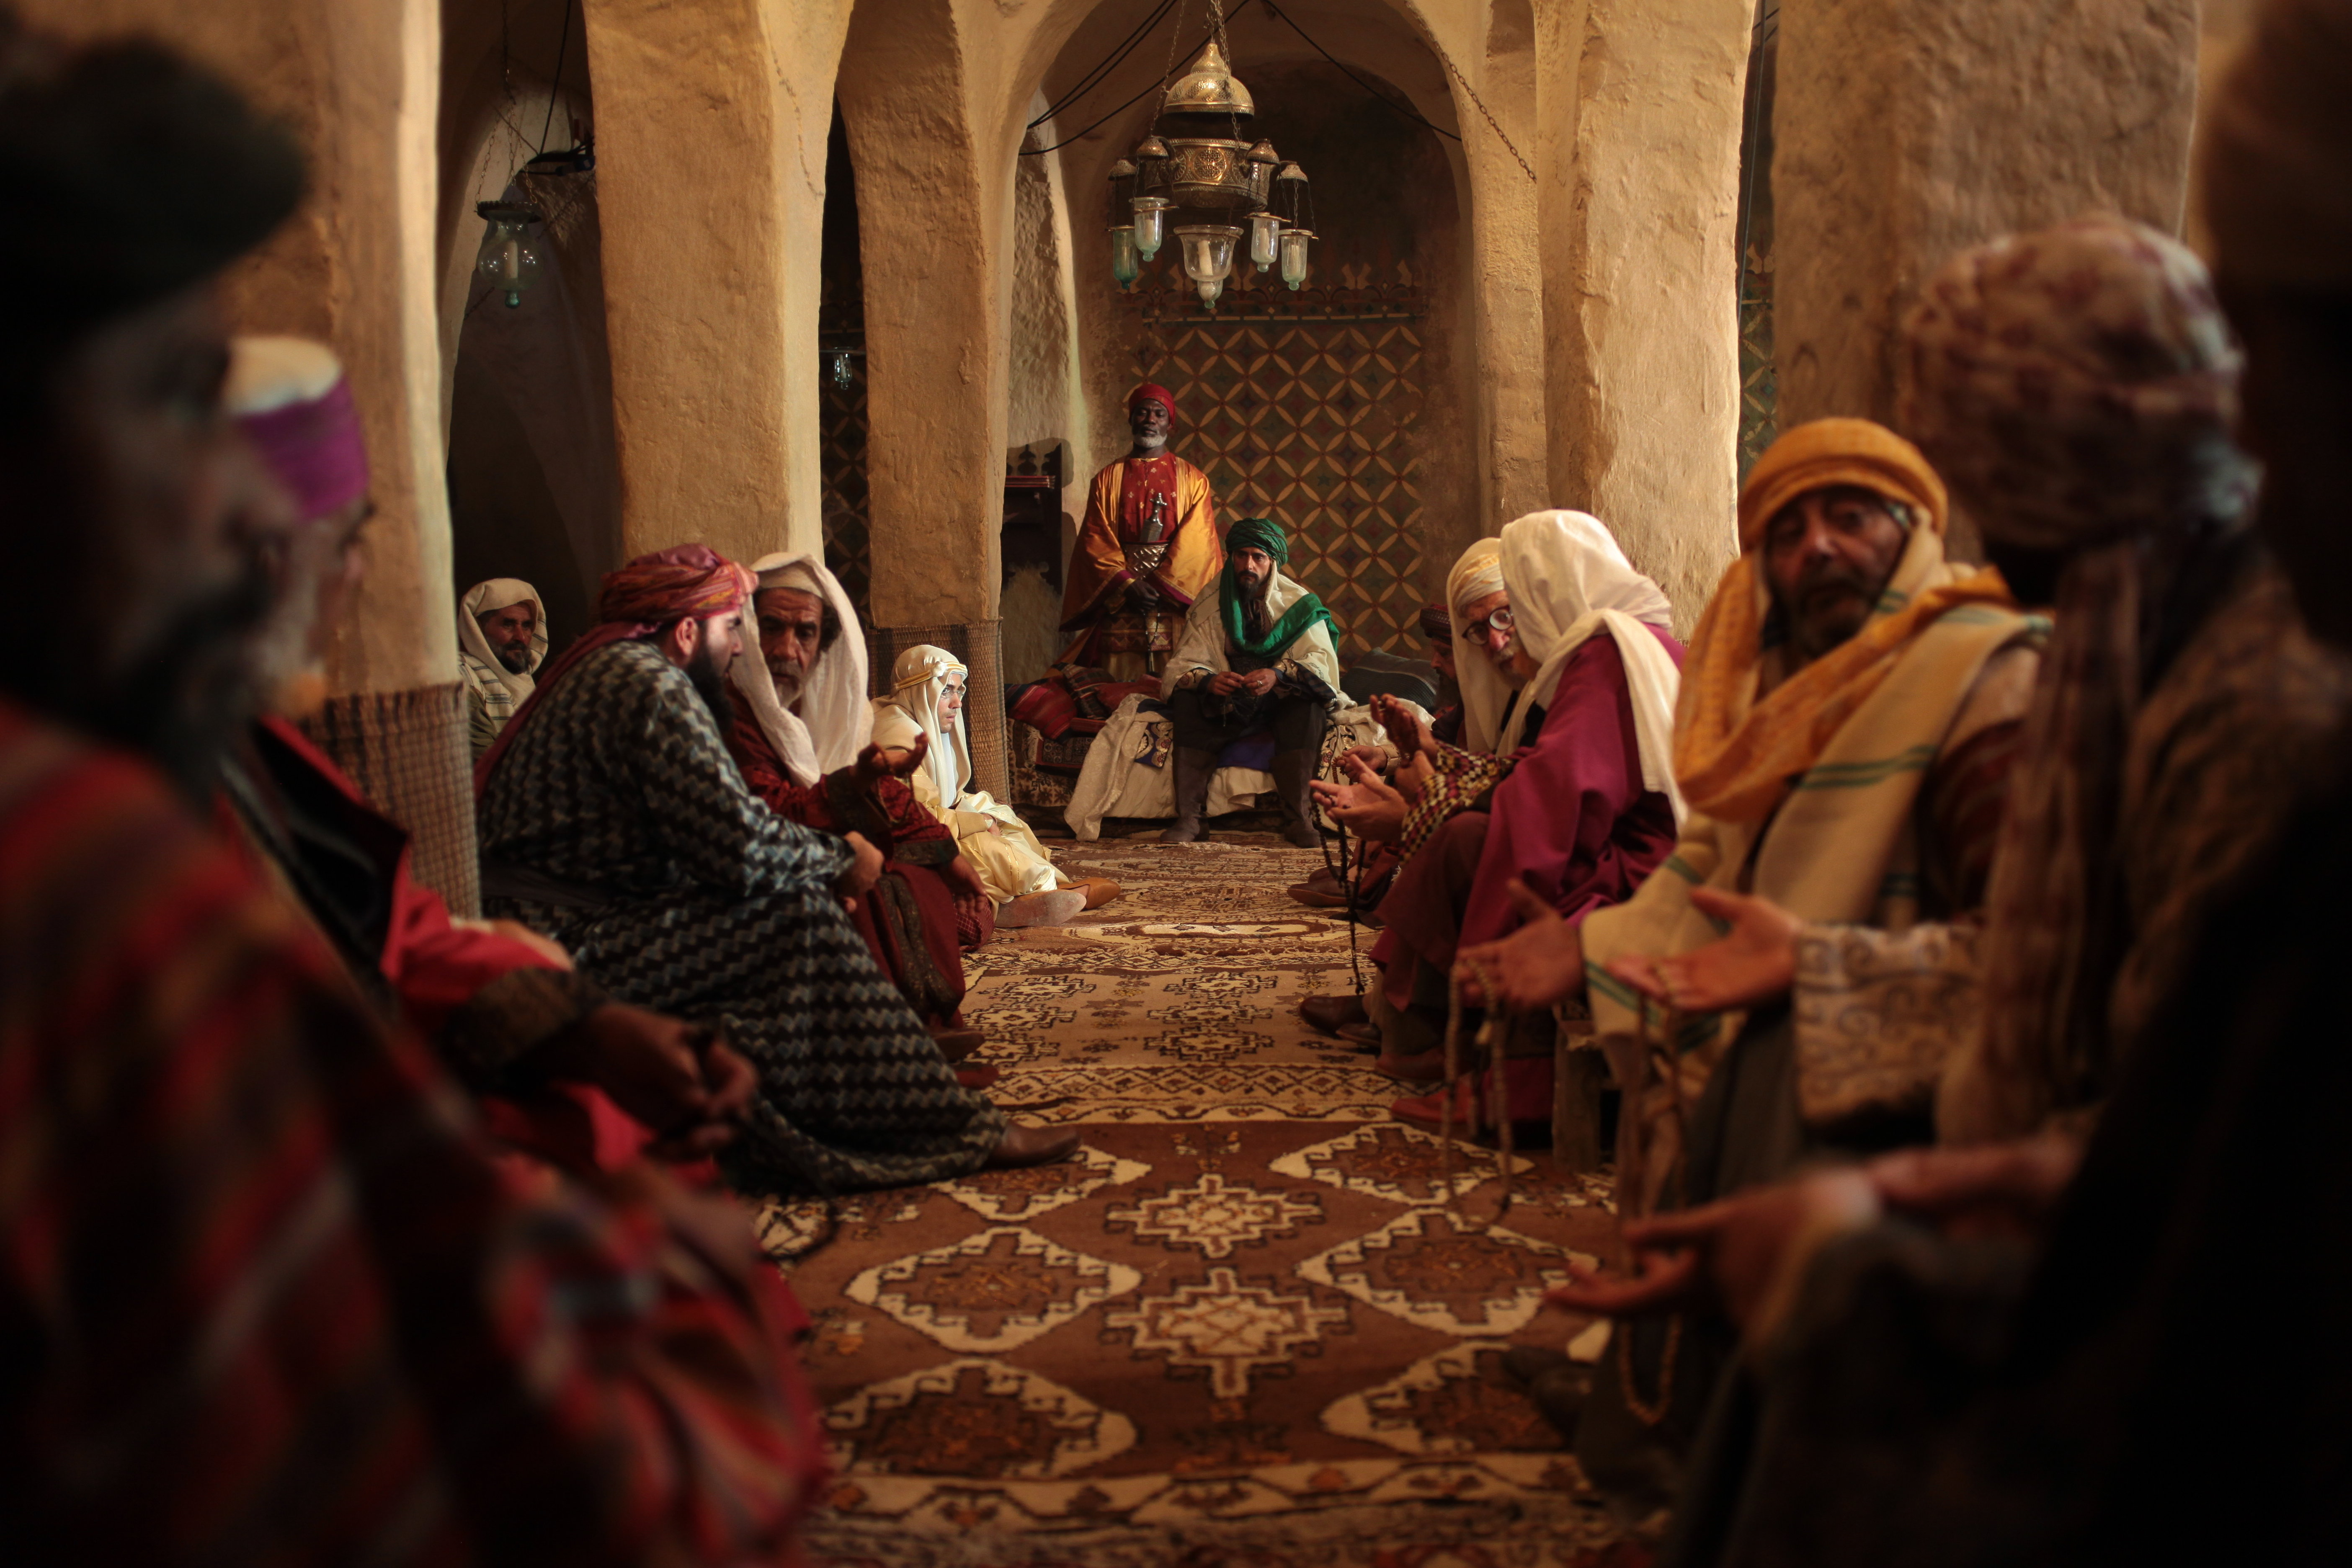 Sultan Amar (Mark Strong) ruler of Salmaah sits with his advisors